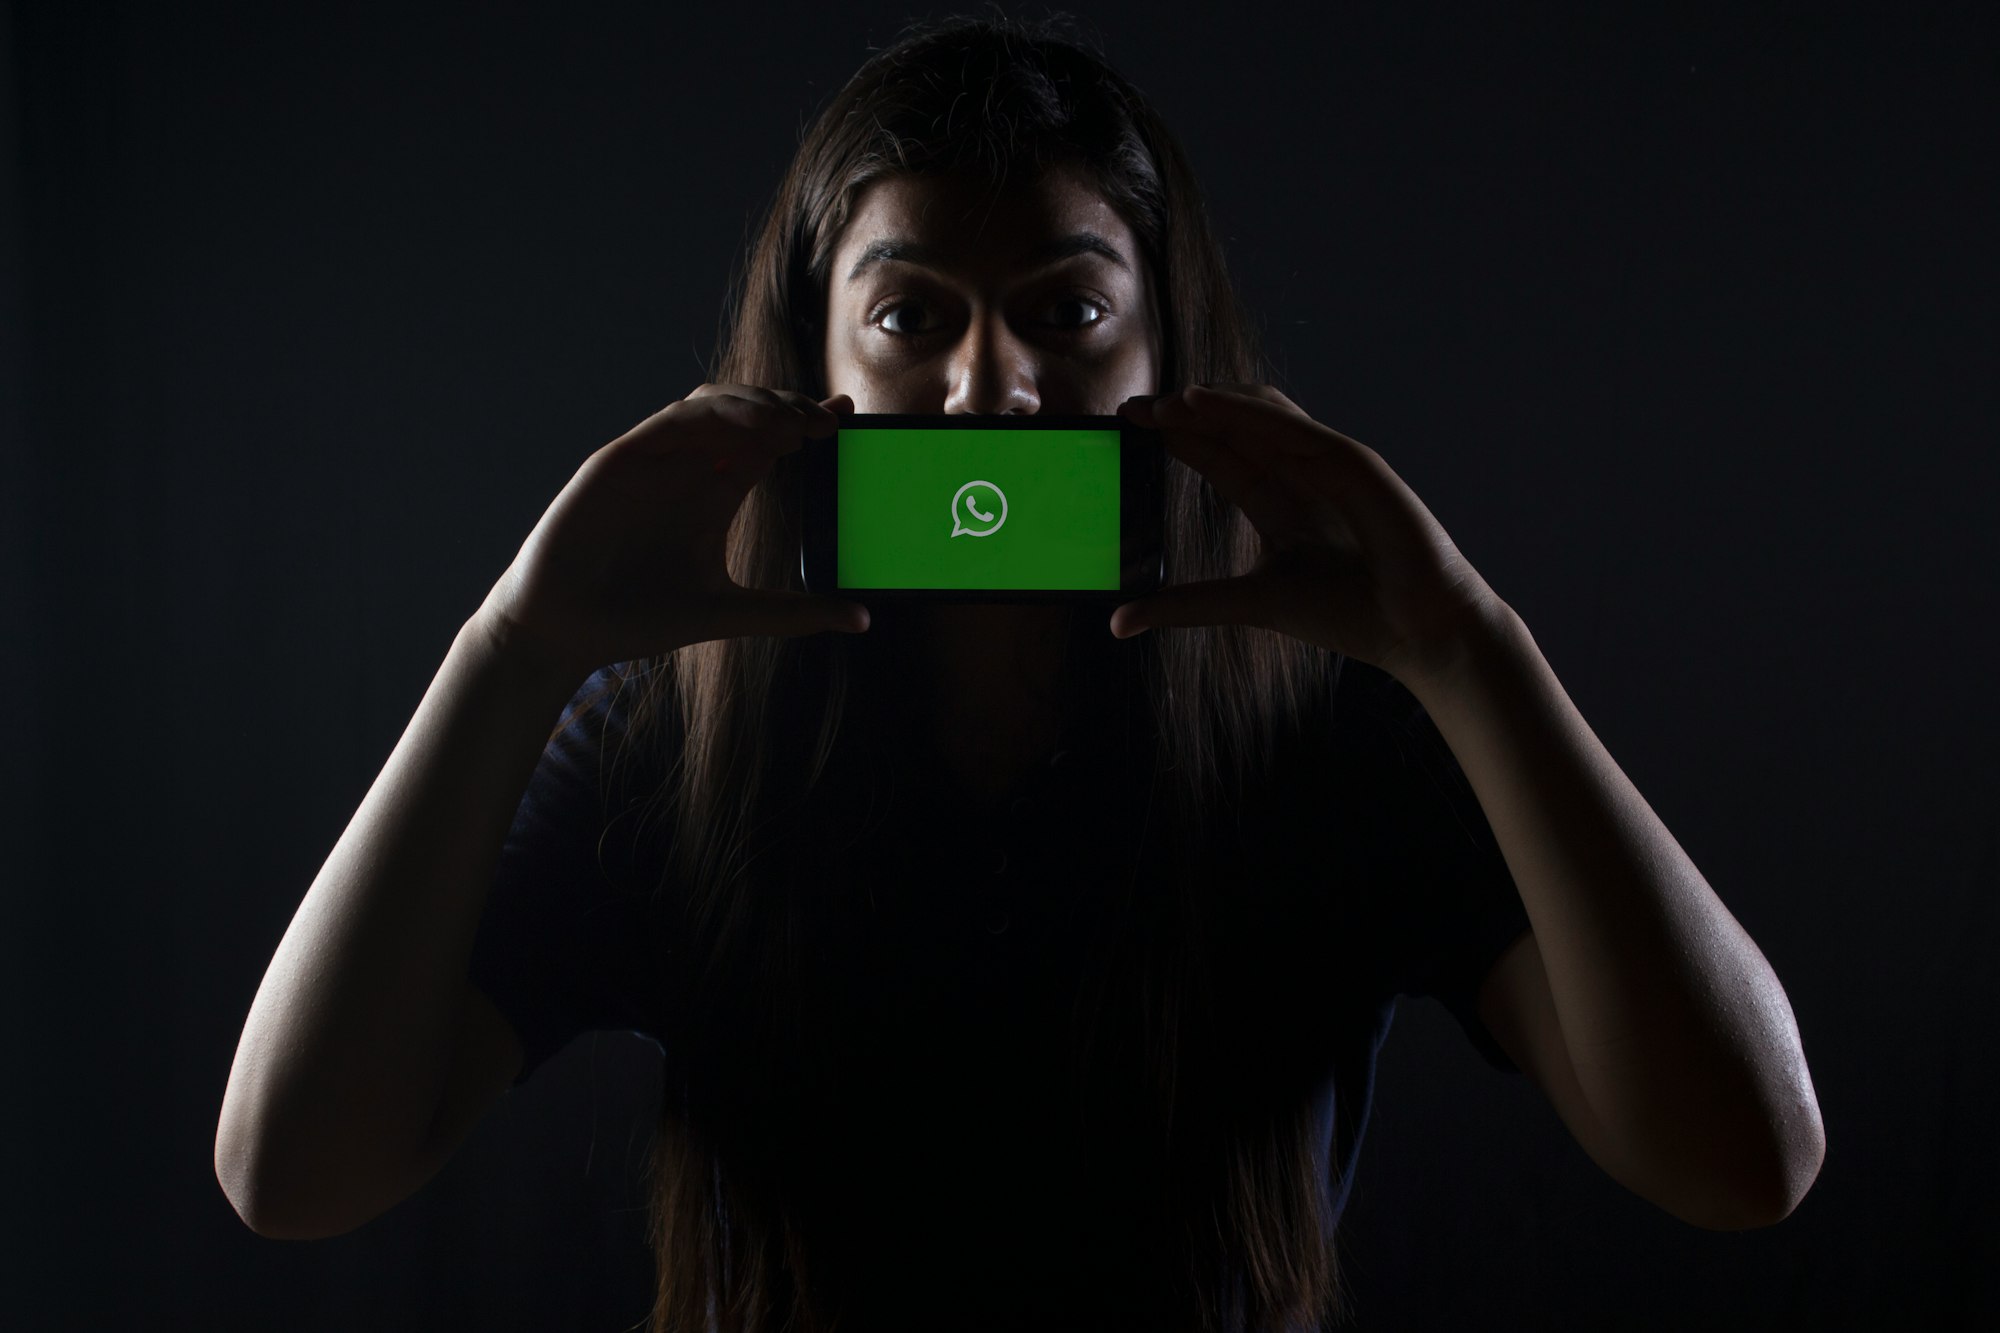 WhatsApp now allows users to bypass internet shutdowns